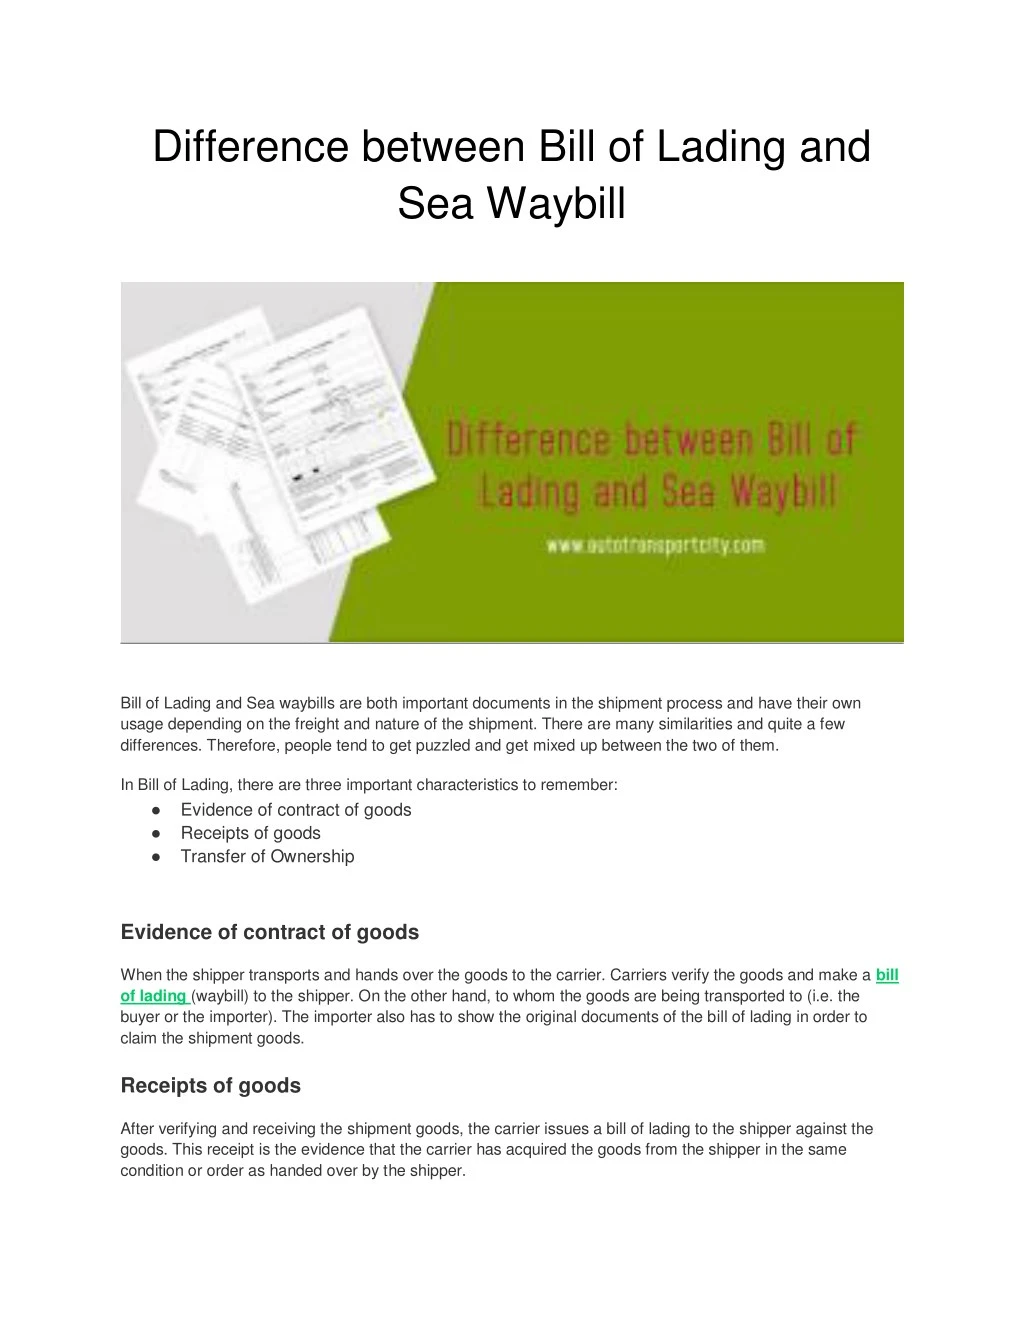 difference between bill of lading and sea waybill